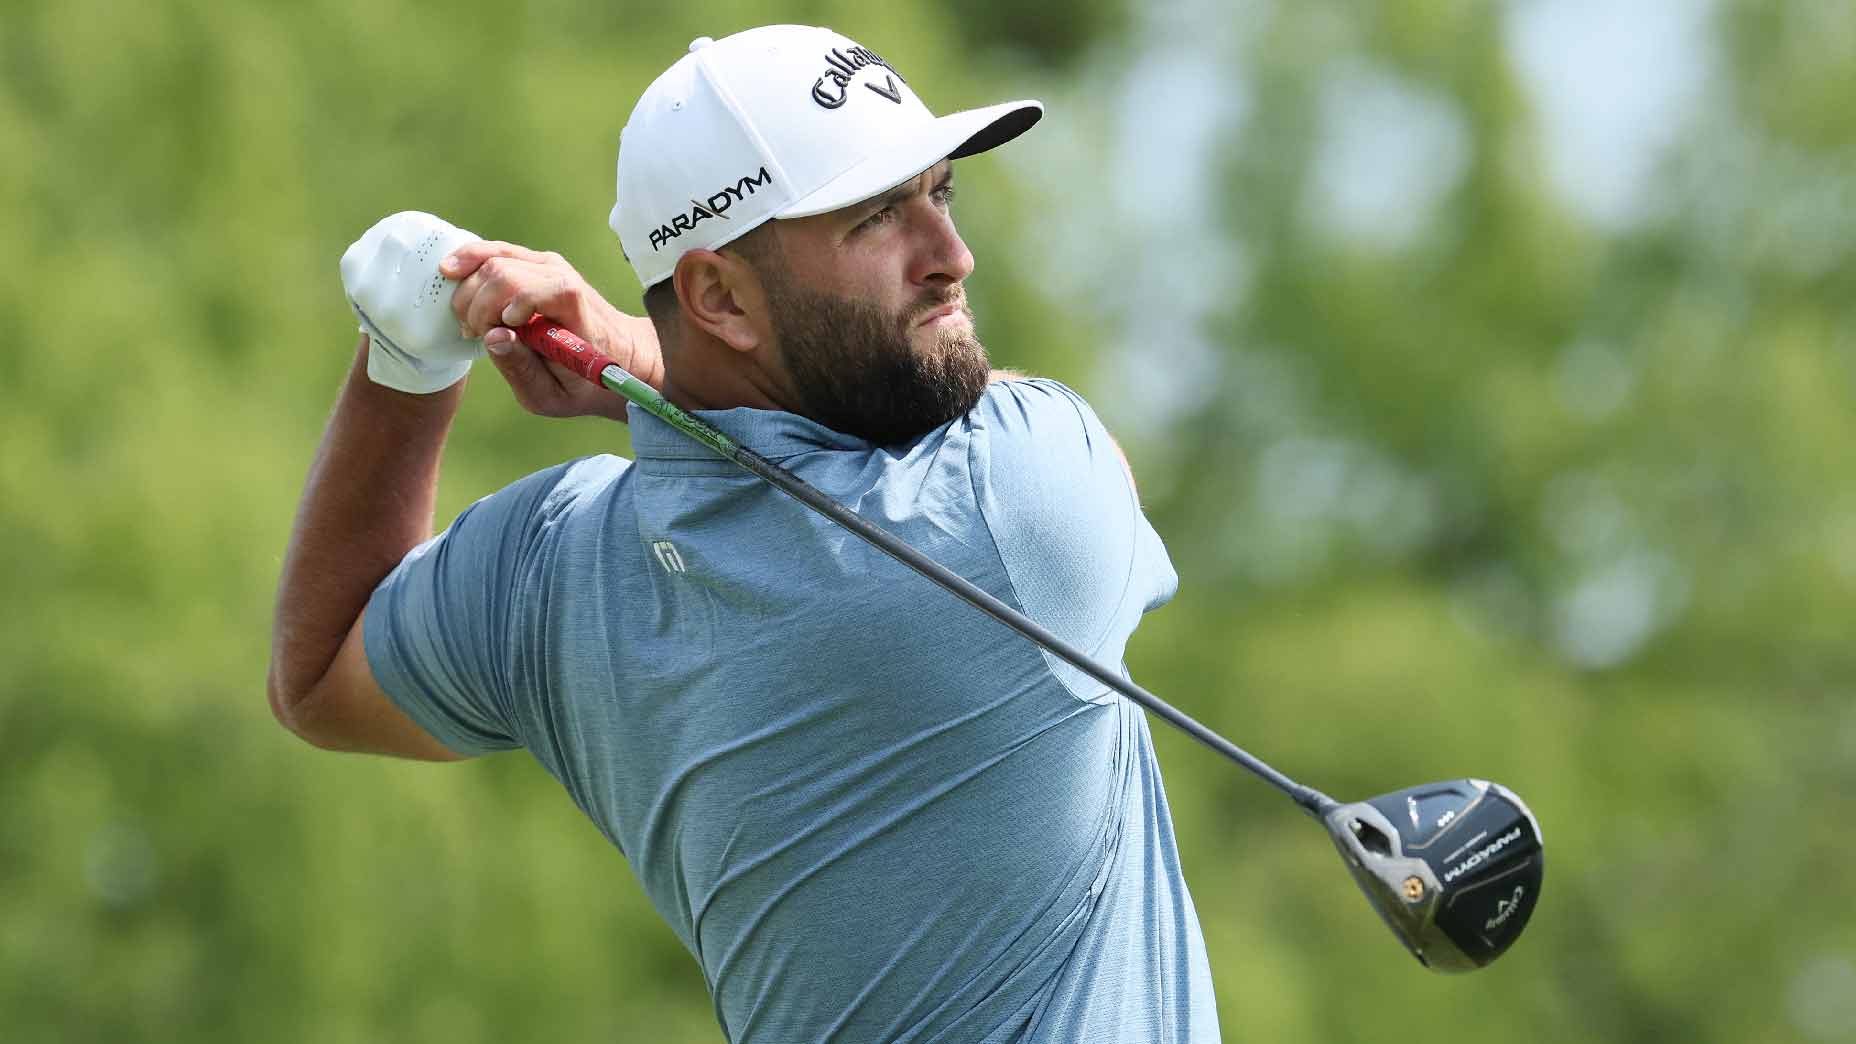 Career grand slam primer: Which active golfers have a shot?